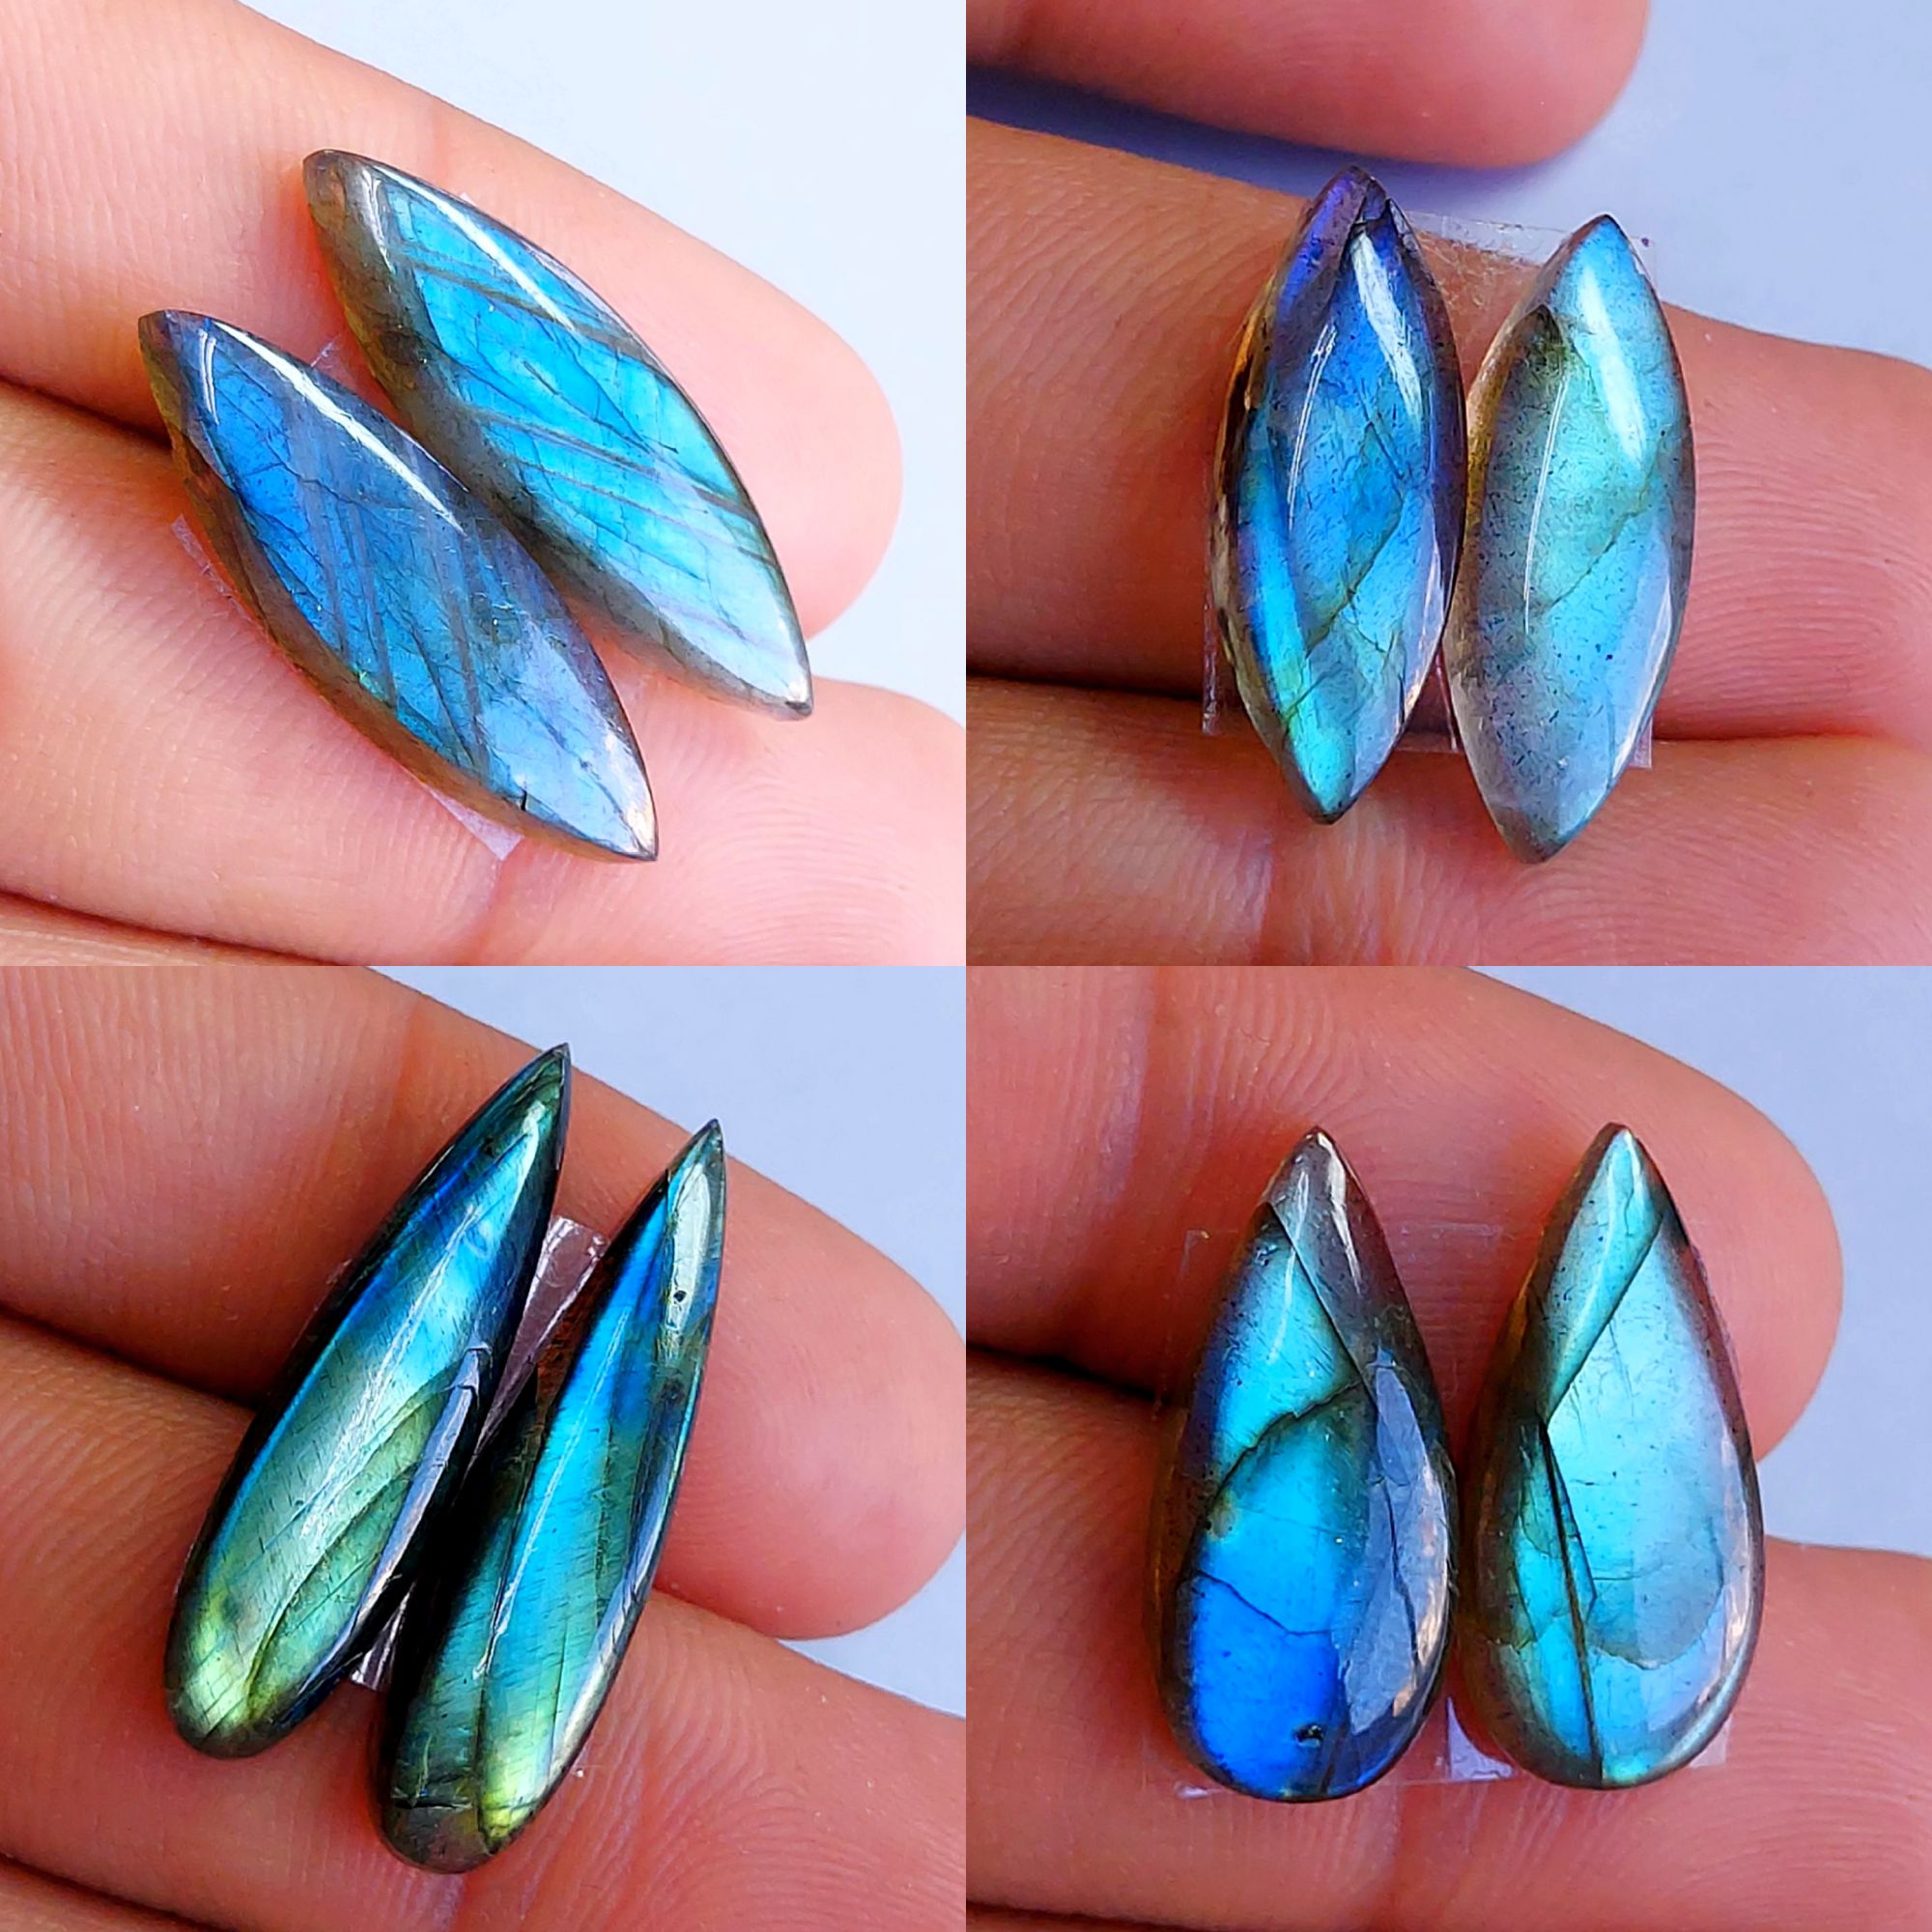 4 Pairs lot 65Cts Natural Labradorite cabochon pair lot for jewelry making loose gemstone lot mix shape and size earring pairs 26x5 20x6mm